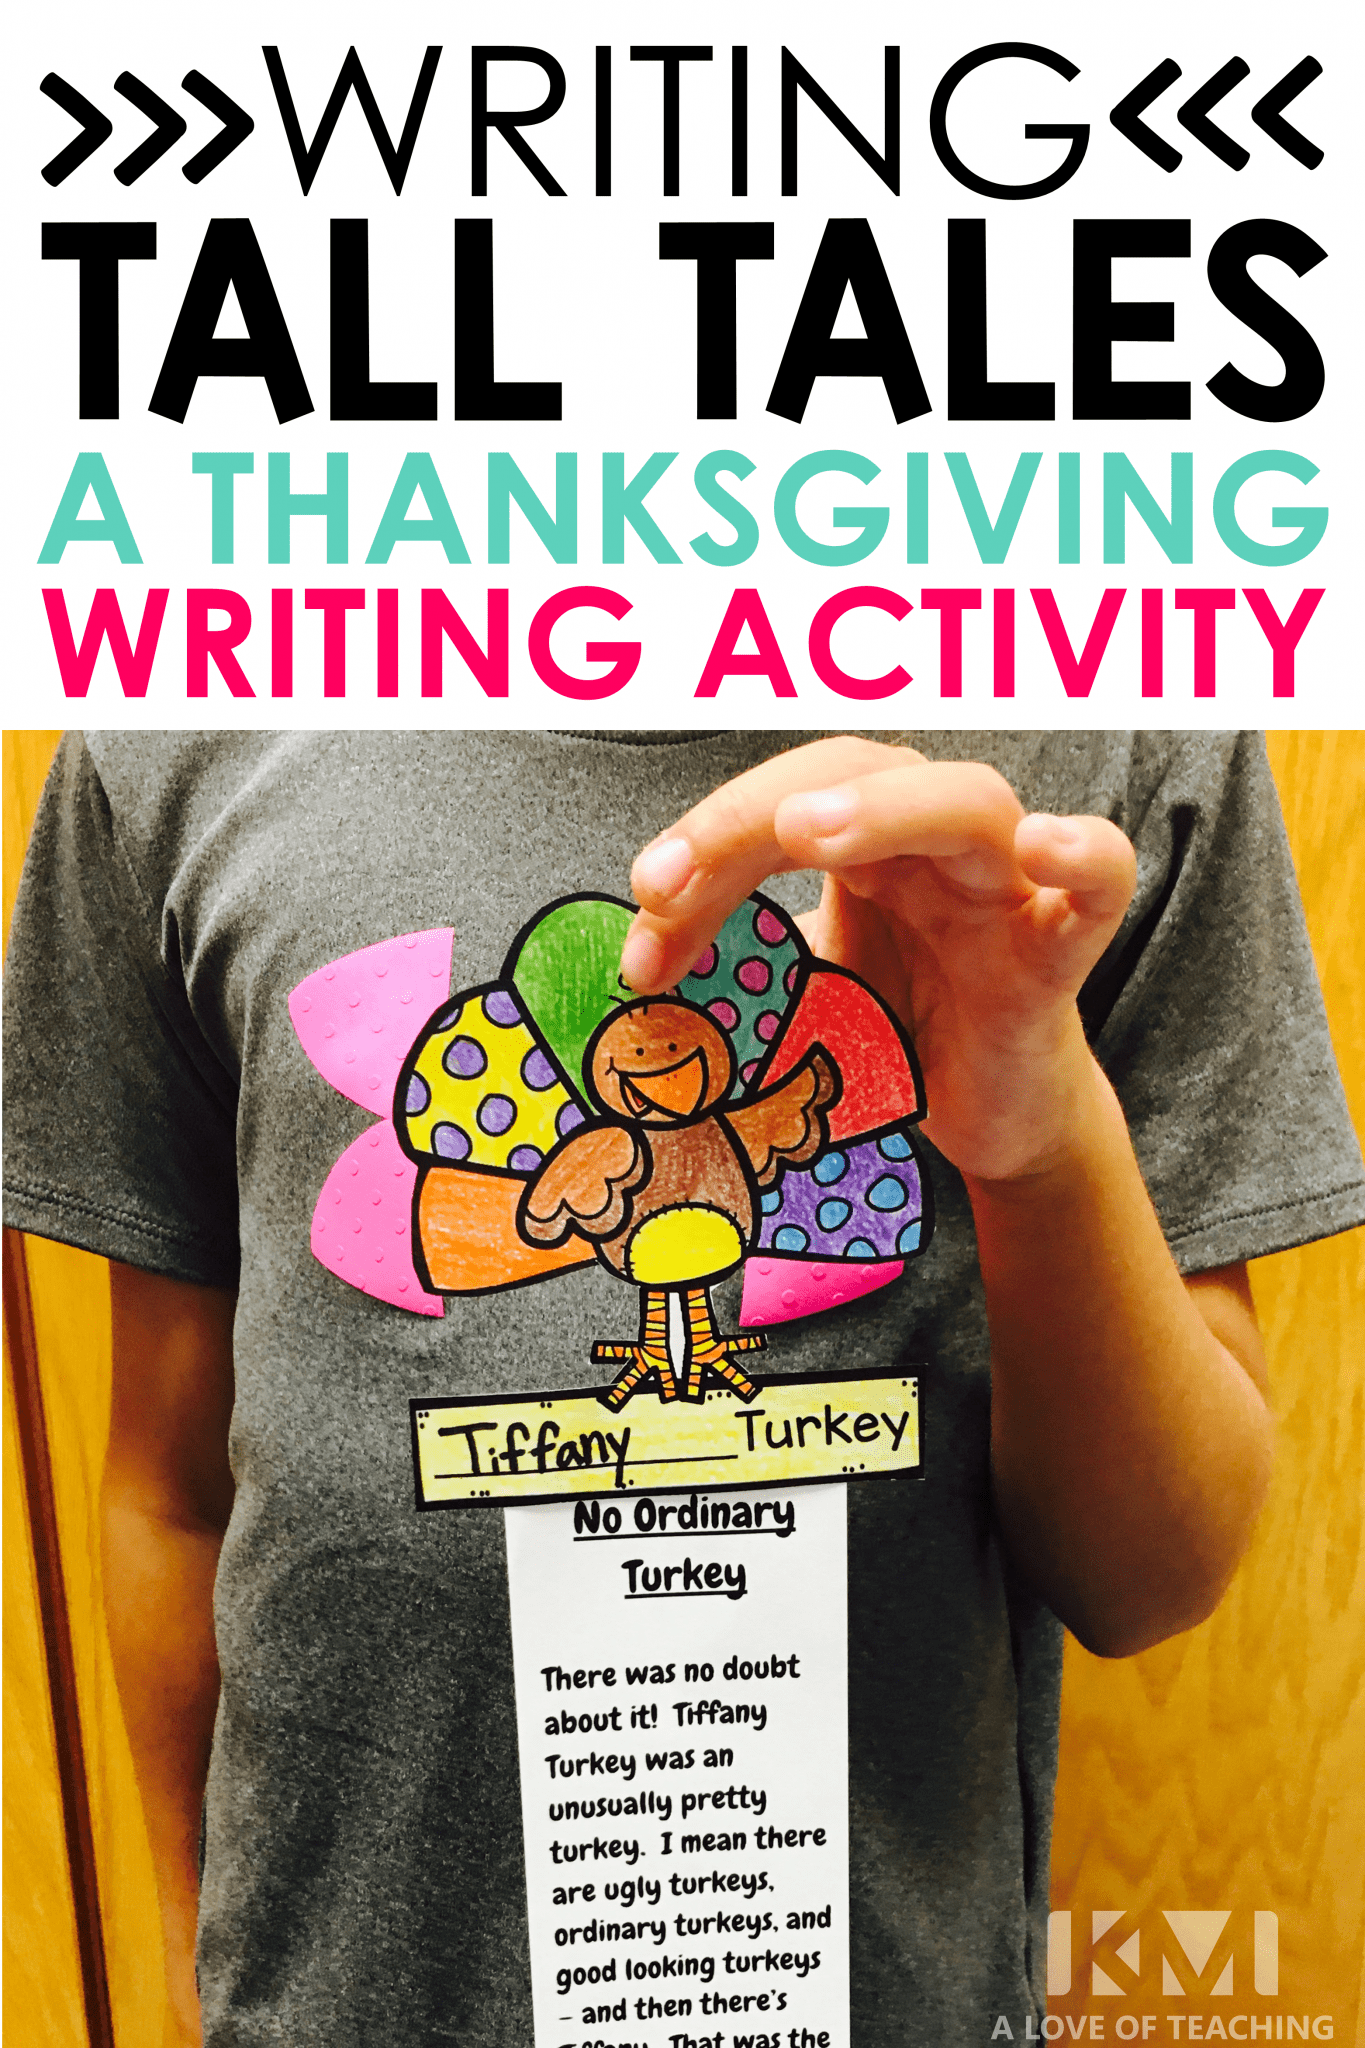 Writing Tall Tales: A Thanksgiving Writing Activity